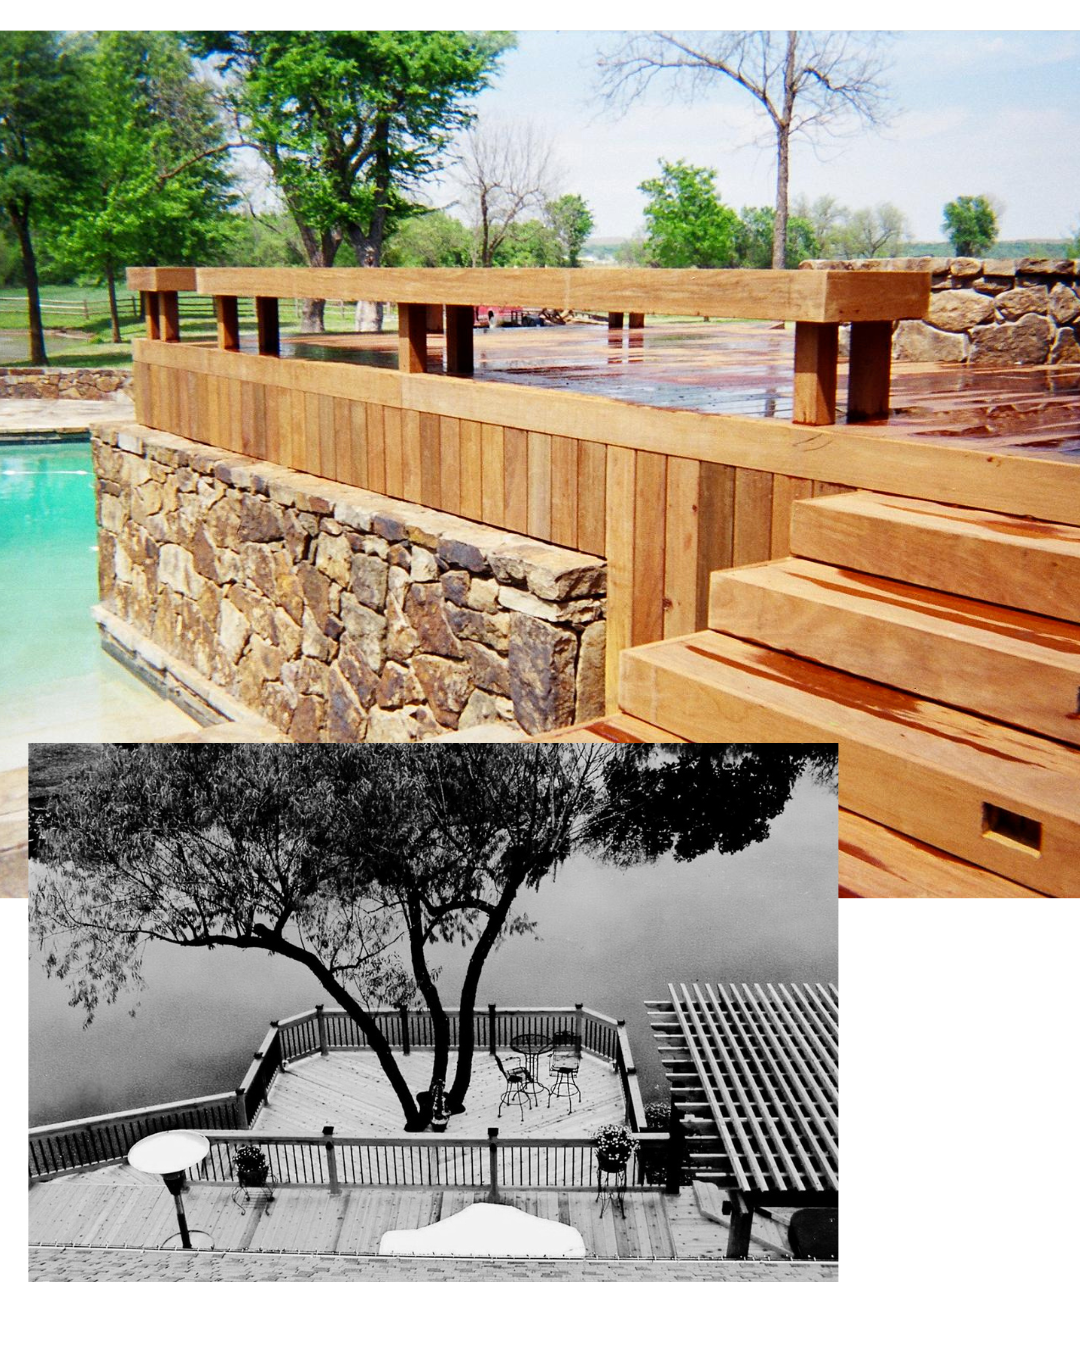 Stacked image of decks. Top image is full color, wood deck with built-in stone firepit and stone retaining wall over custom in-ground pool. Bottom image in black and white, view from above looking down at custom two-level deck with pergola and tree cut-out, overlooking lake. Outdoor Living design + build by SwiftCo + Deckworks in Norman, Oklahoma. Purpose is to show our quality of work.